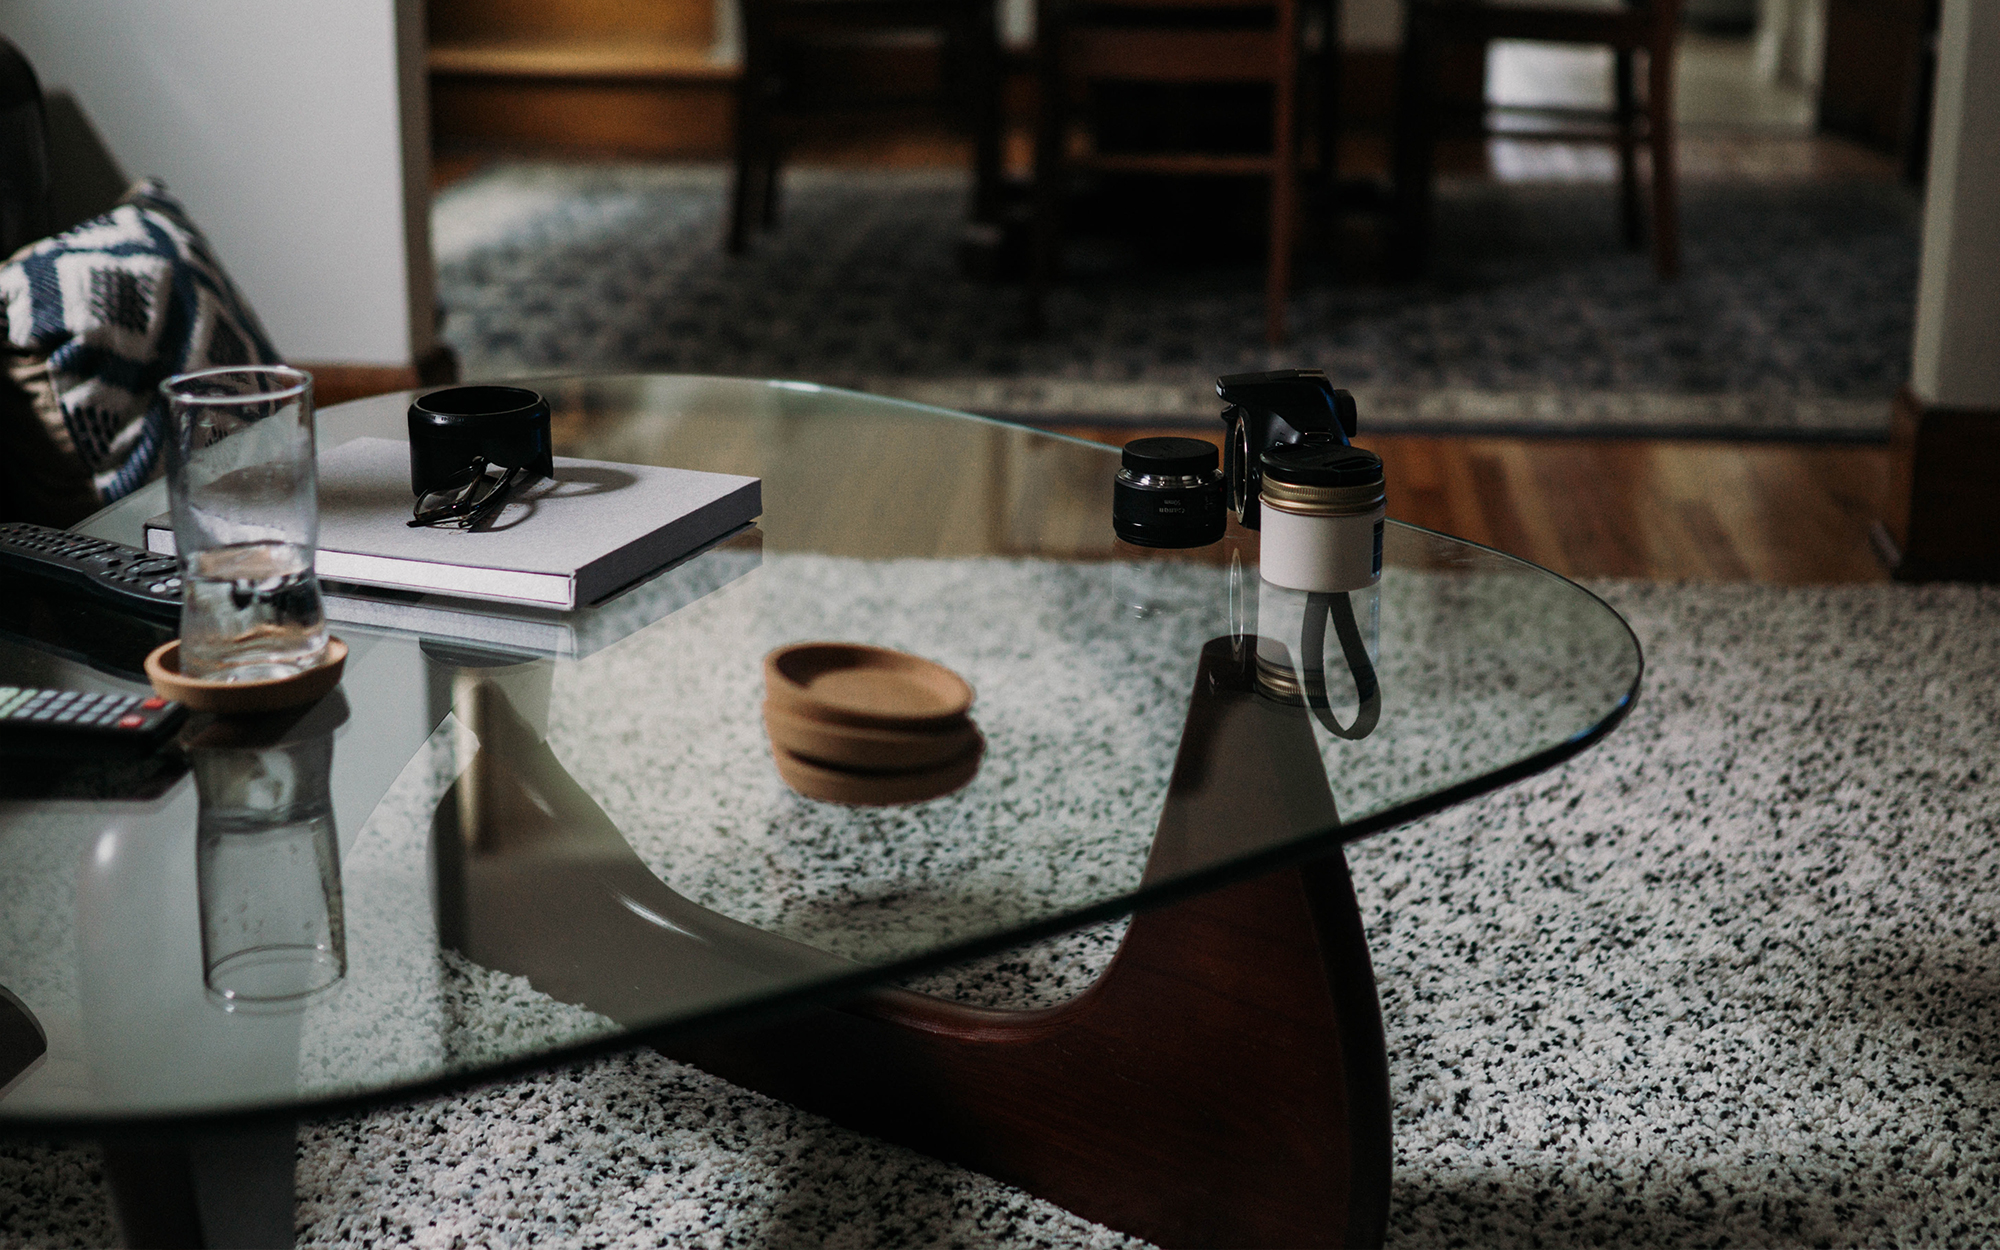 Impressive noguchi table knock off Your Guide To The Noguchi Coffee Table Pash Classics Blog